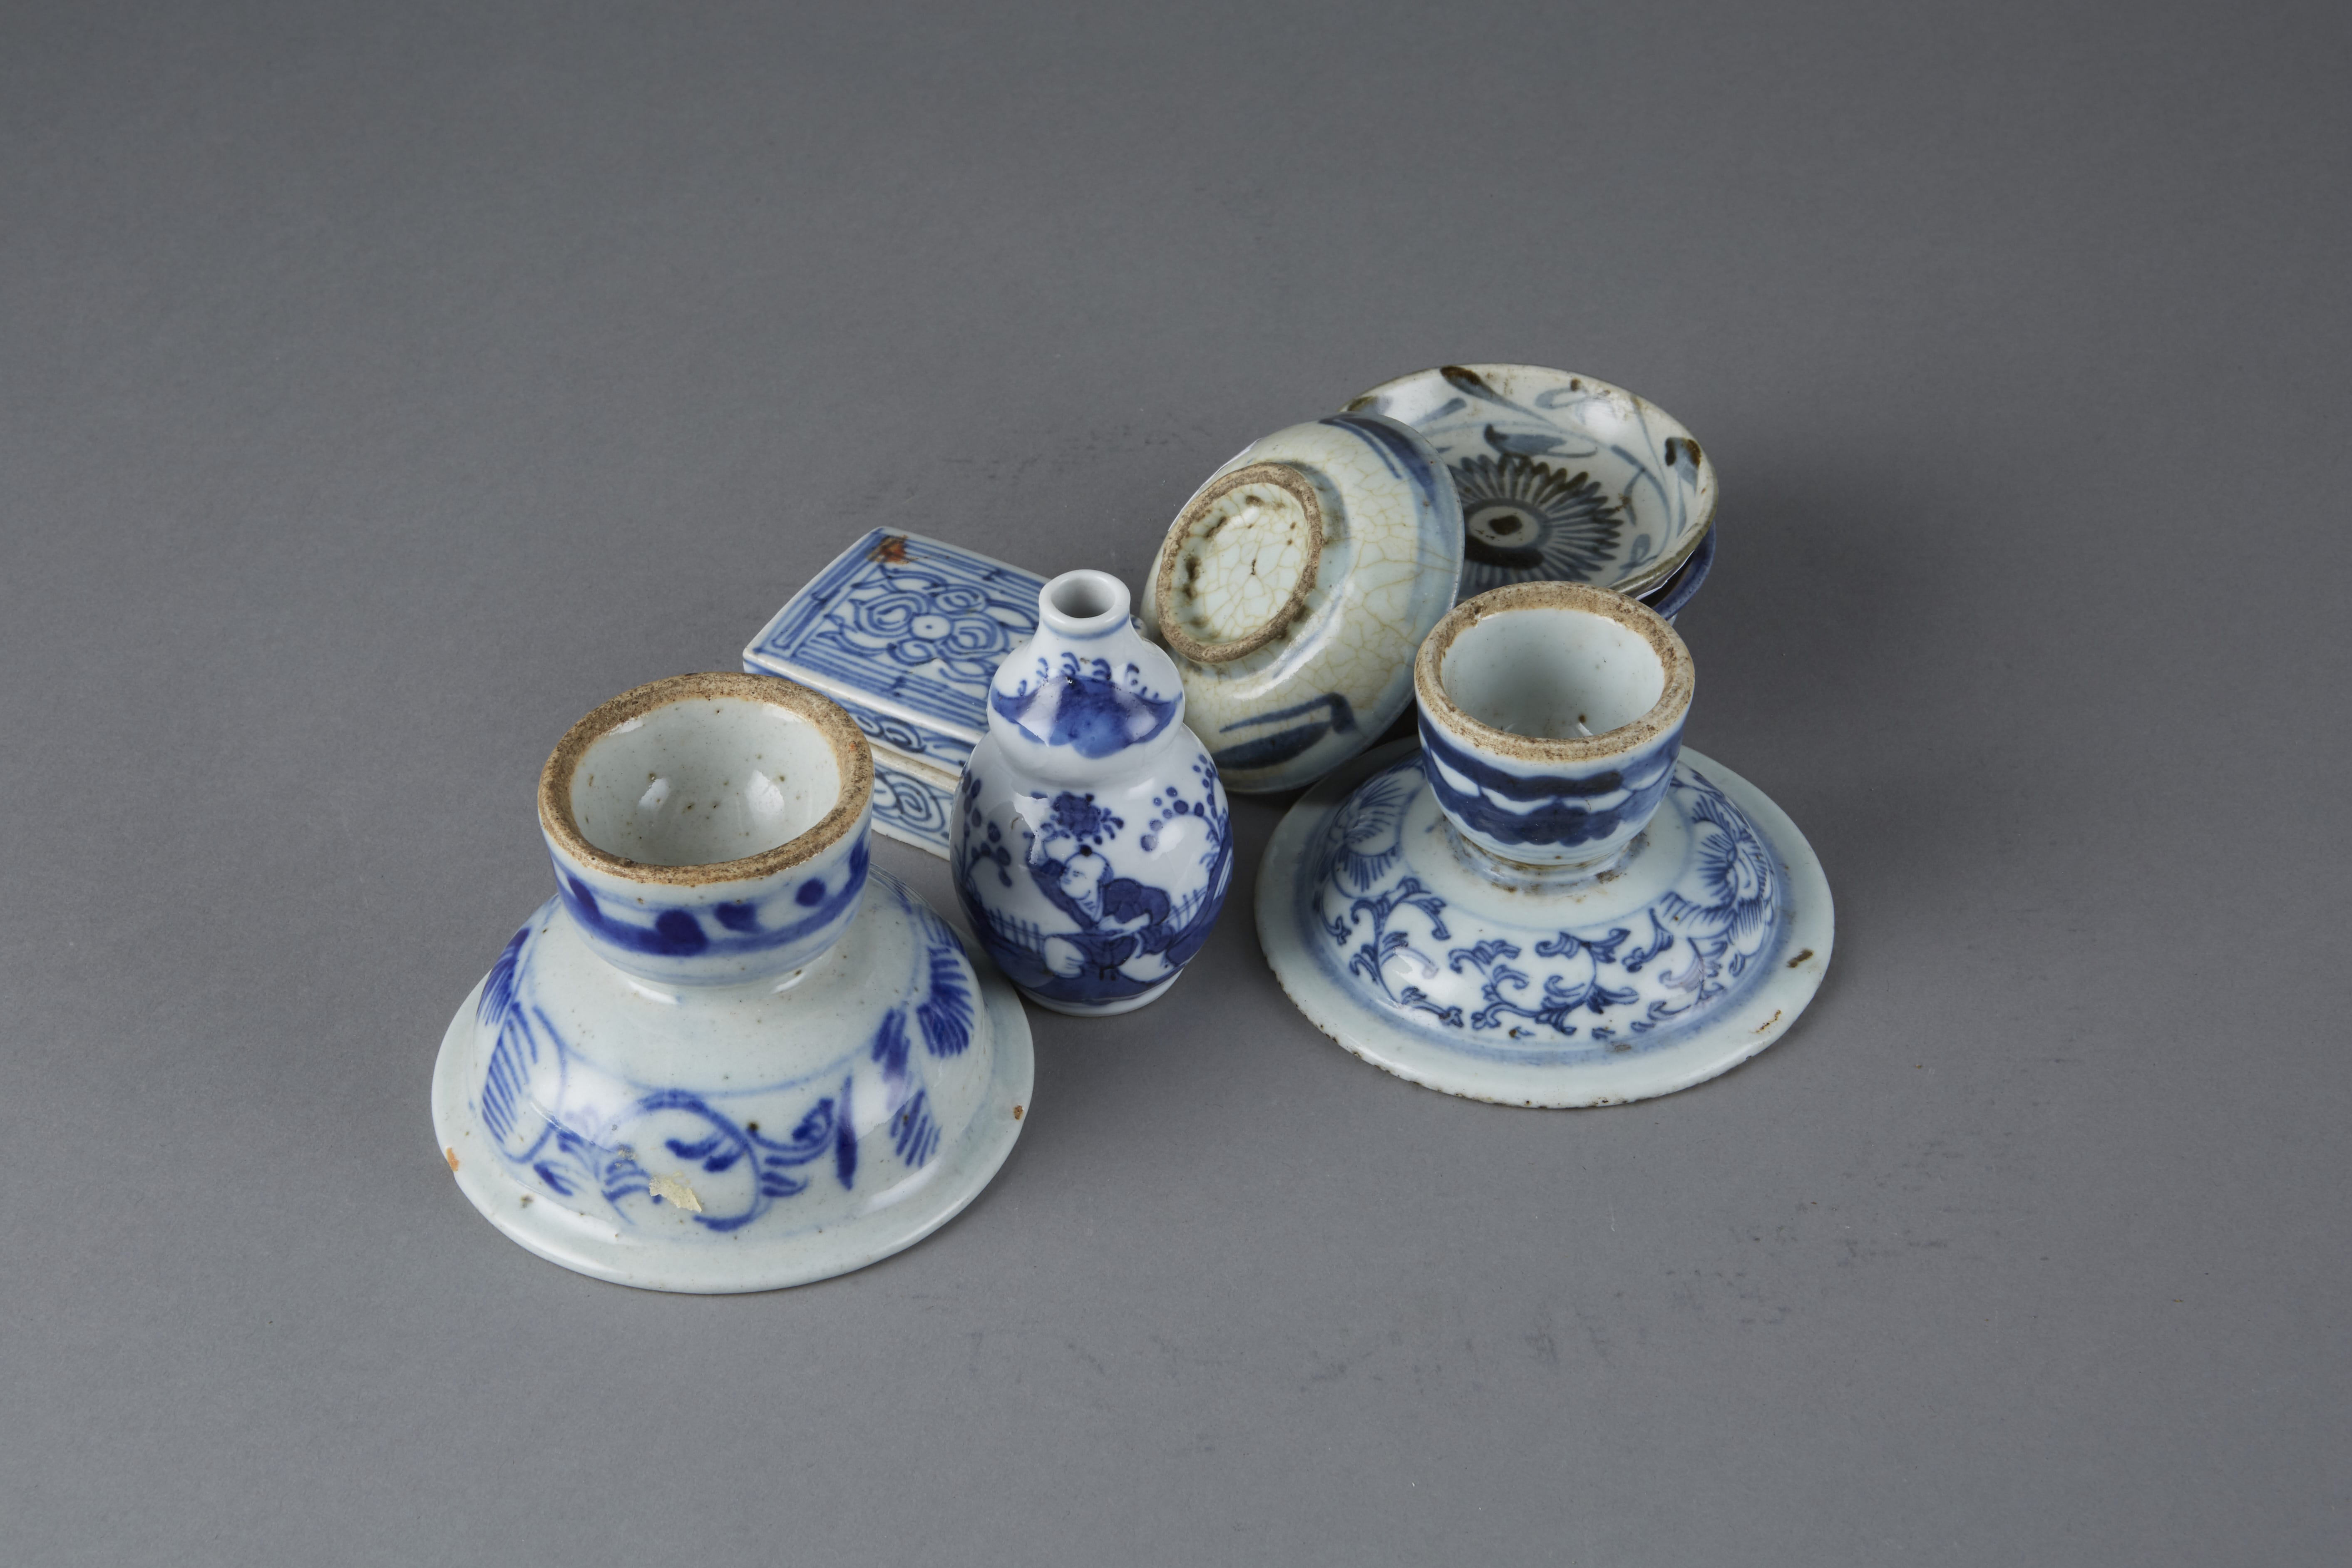 Lot 060: Group of 8: Chinese Blue and White Porcelain Objects from the 19th/20th Century.